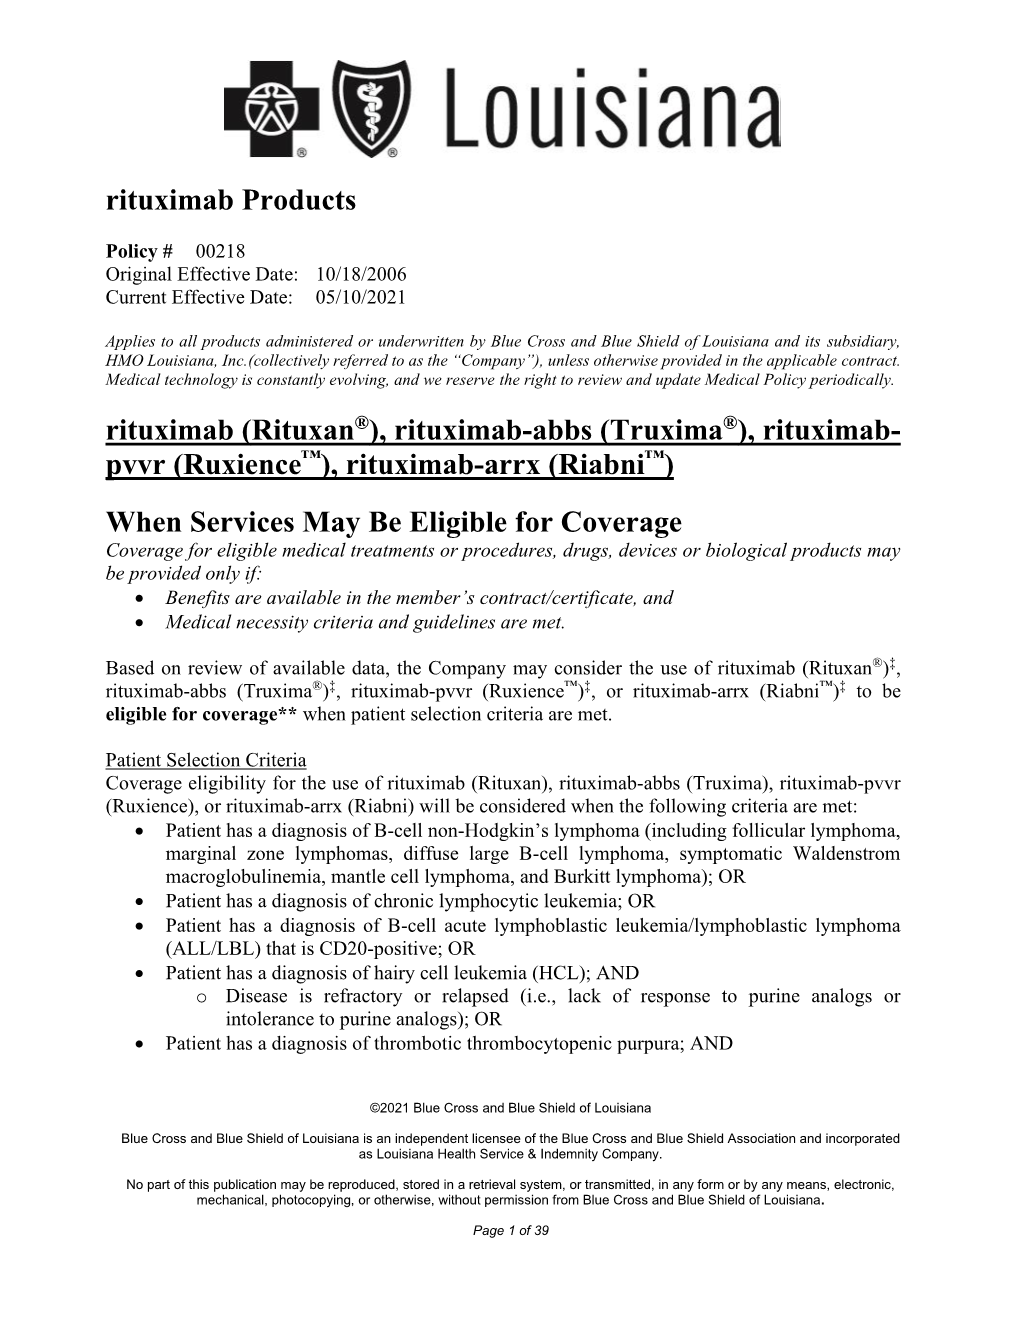 00218 Rituximab Products